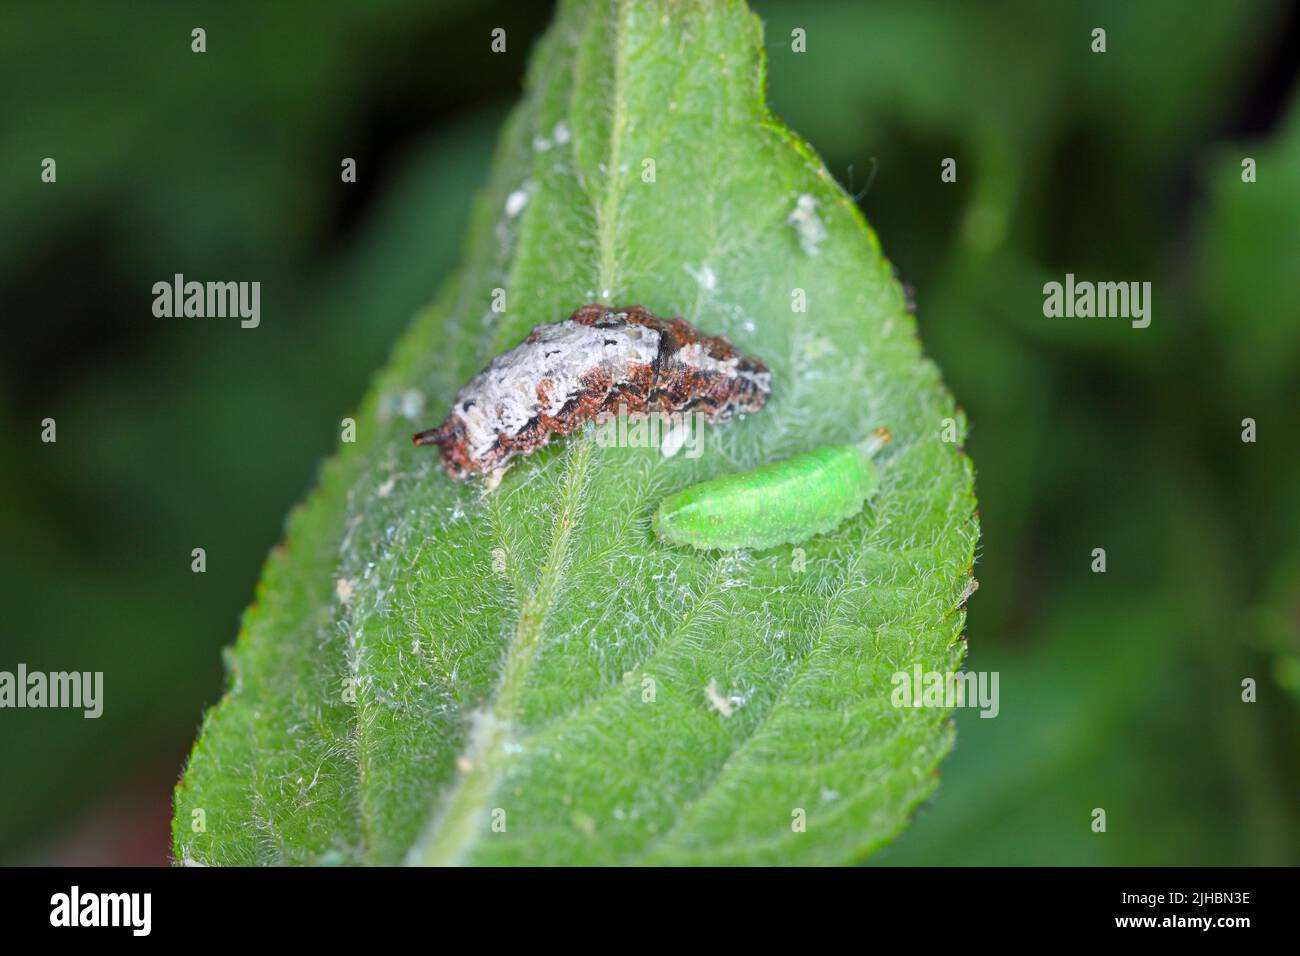 Larva of Hoverflies called flower flies or syrphid flies, make up the insect family Syrphidae. Stock Photo